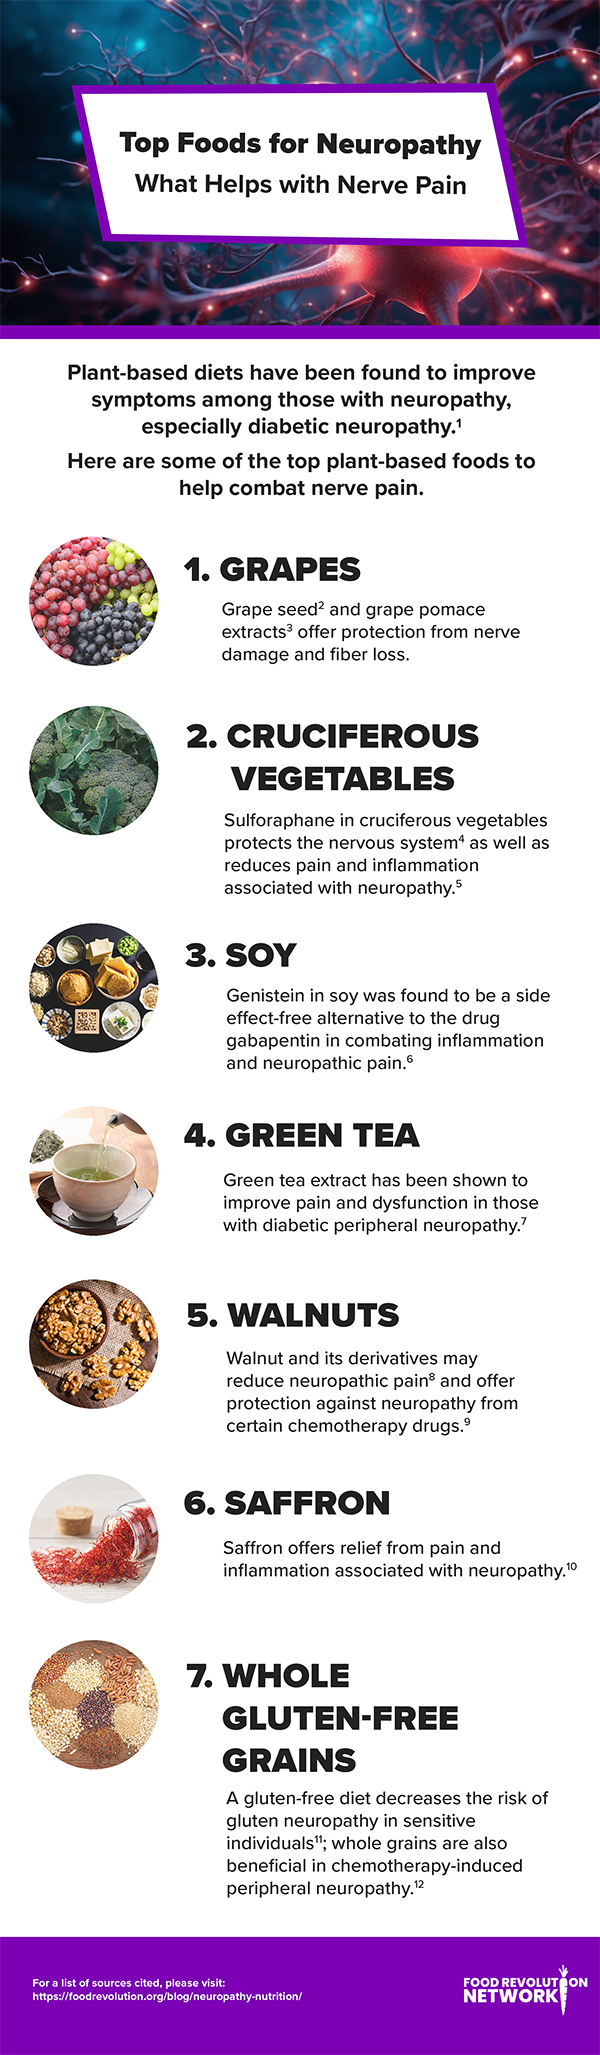 Top Foods for Neuropathy infographic